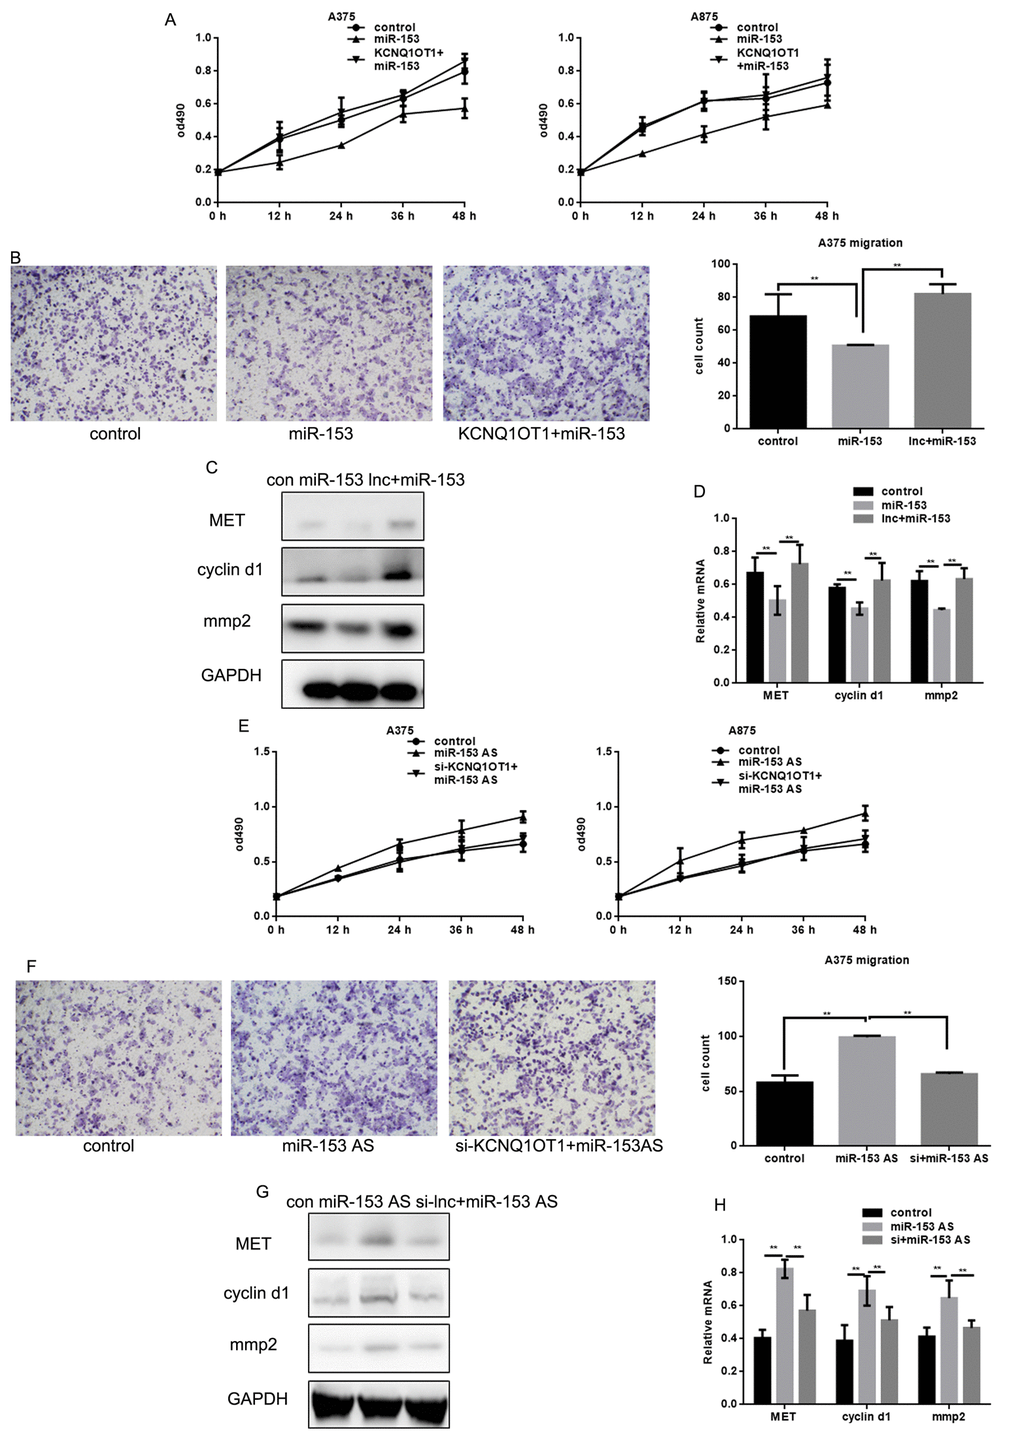 miR-153 mediates the effect of KCNQ1OT1 on proliferation and metastasis in melanoma cells. (A) After transfecting with control, miR-153, or KCNQ1OT1 and miR-153, A375 and A875 cell proliferation was detected using an MTT assay. Data are shown as mean ± SEM. (B) After transfecting control, miR-153, or KCNQ1OT1 and miR-153 in A375 cells, a transwell assay without matrigel was performed. Cells were counted and results represent the mean ± SD of three experiments. ** P C, D) Western blot and real time PCR was used to detect indicant proteins in A375 cells. ** P E) After transfecting with control, AS-miR-153, or si-KCNQ1OT1 and miR-153 AS, A375 and A875 cell proliferation was detected using an MTT assay. Data are shown as mean ± SEM. (F) After transfecting control, ASO-miR-153, or si-KCNQ1OT1 and miR-153 AS in A375 cells, a transwell assay without matrigel was performed. Cells were counted and results represent the mean ± SD of three experiments. ** PG, H) Western blot and real time PCR were used to detect indicant proteins in A375 cells. ** P